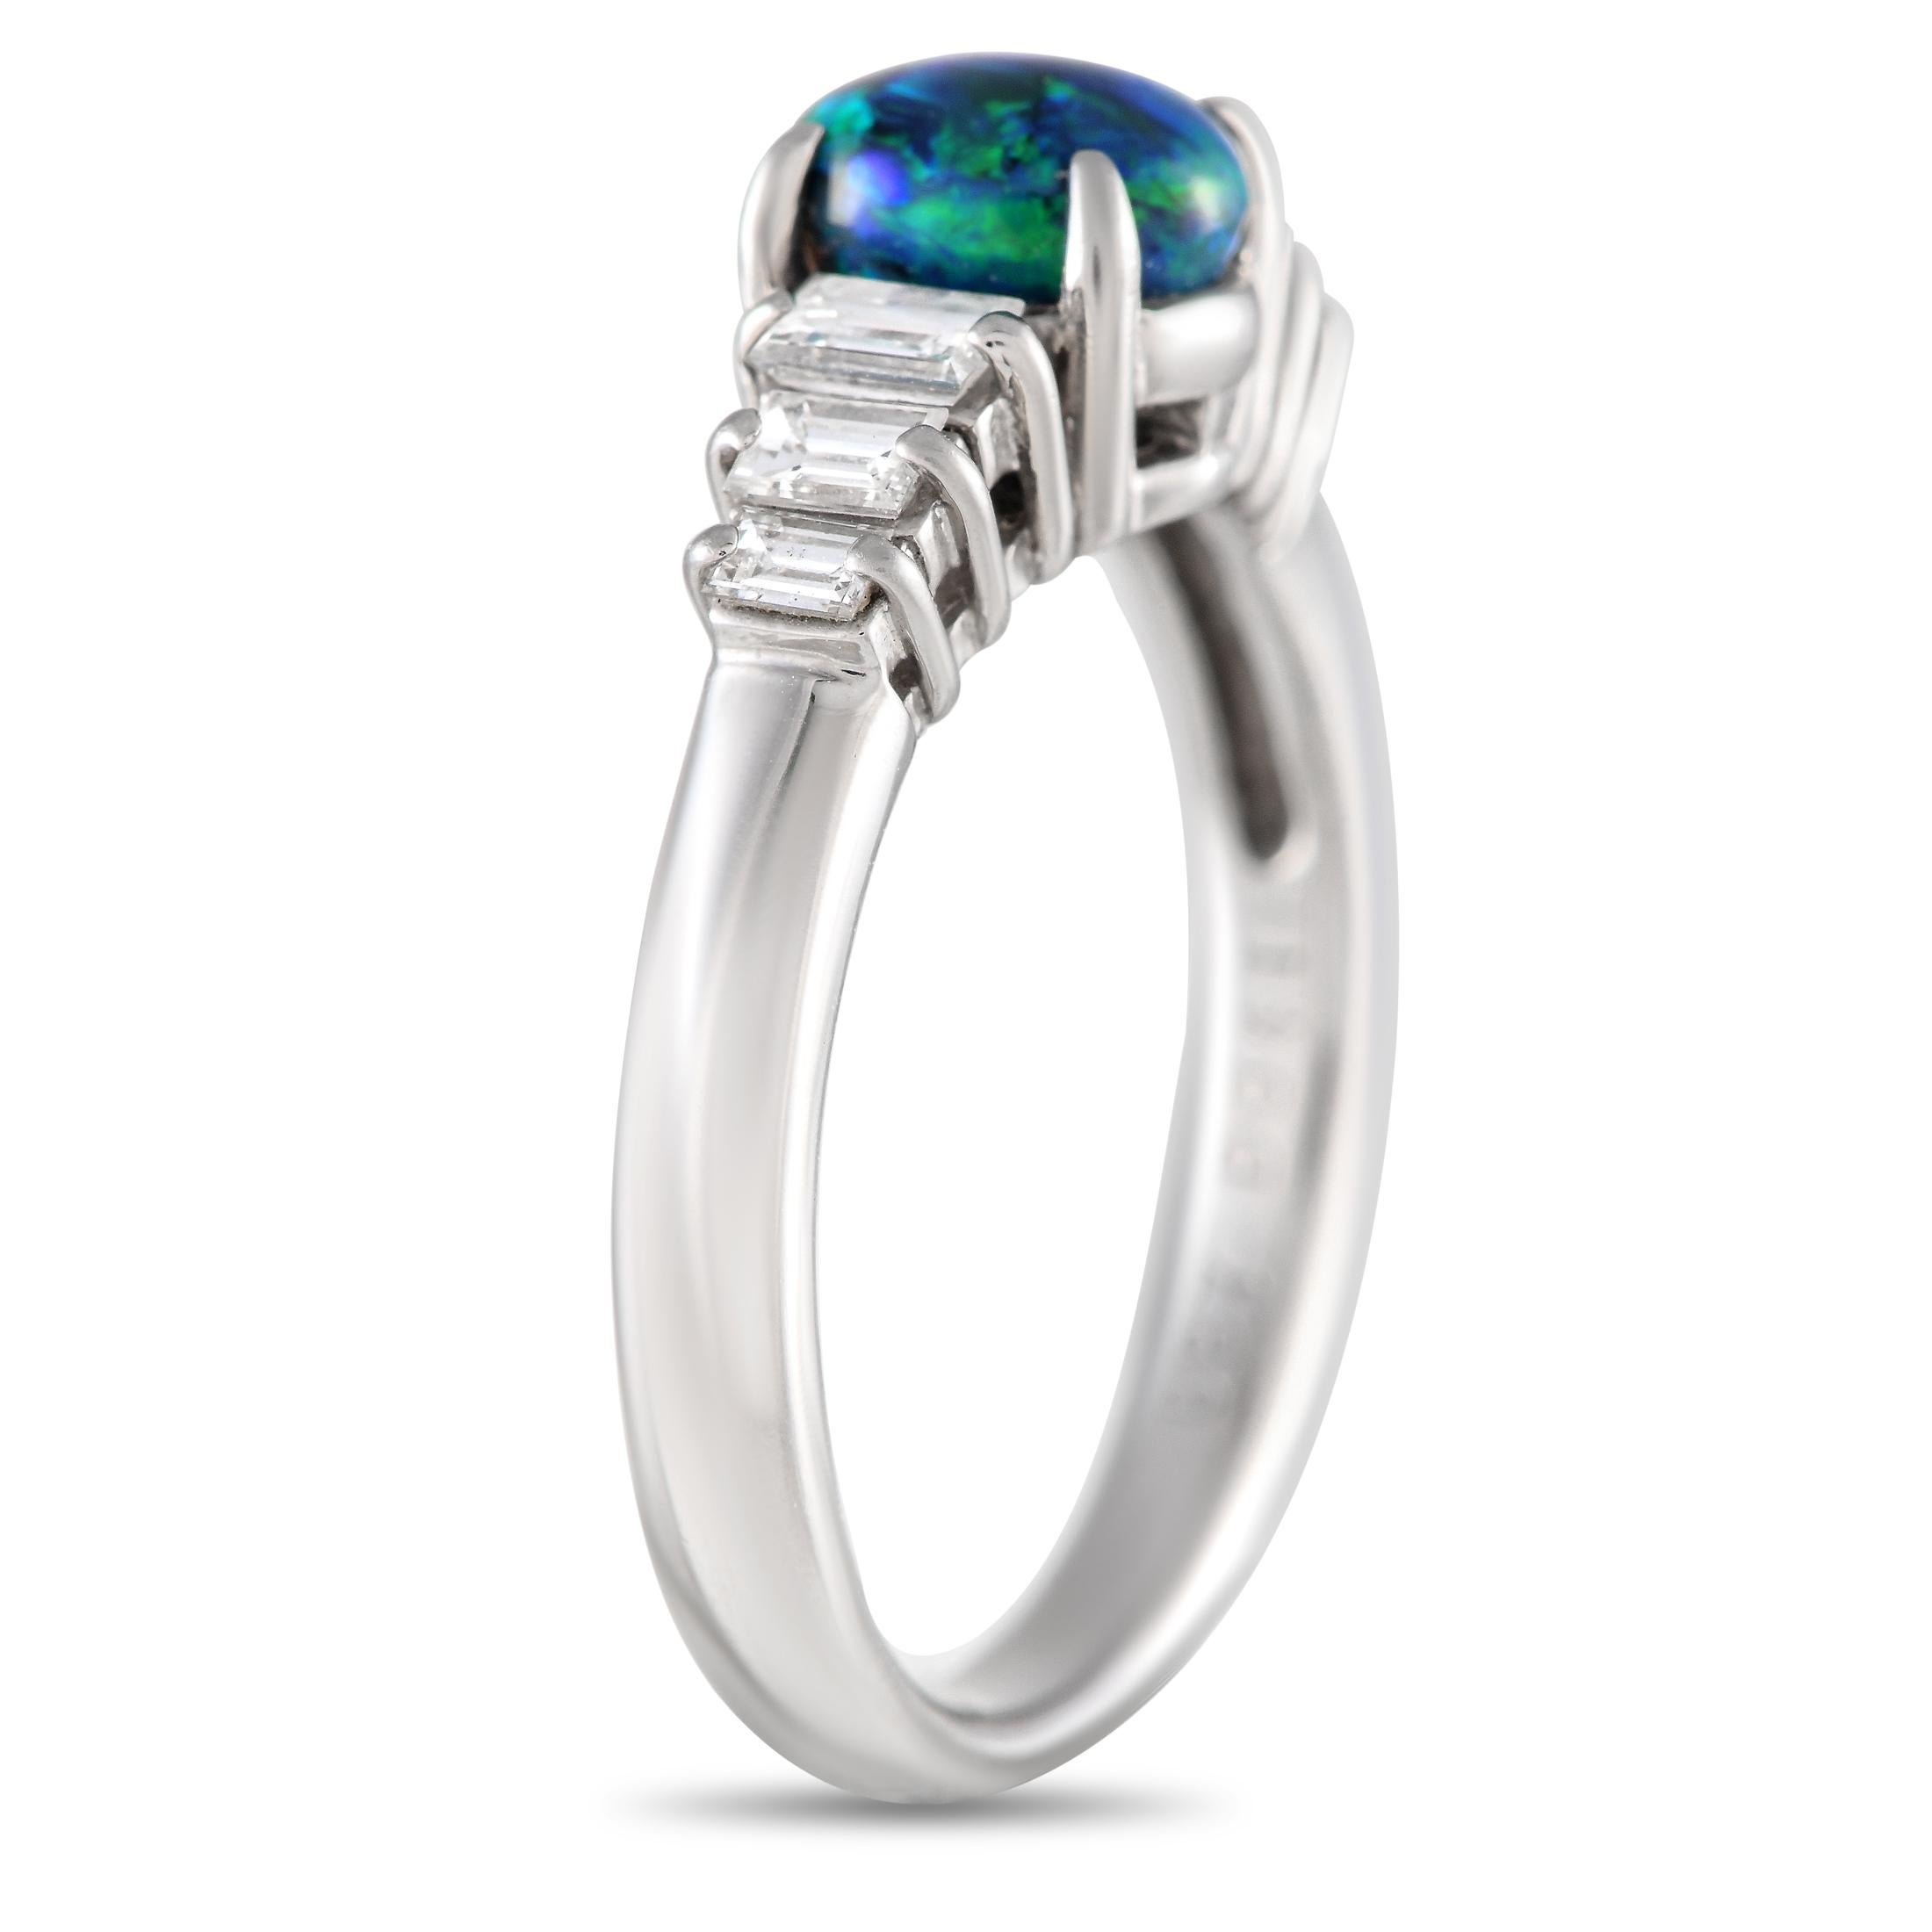 This simple, elegant ring will instantly capture your imagination. The 0.87 carat opal center stone serves as a stunning focal point thanks to its breathtaking combination of blue and green tones. Diamonds with a total weight of 0.41 carats elevate